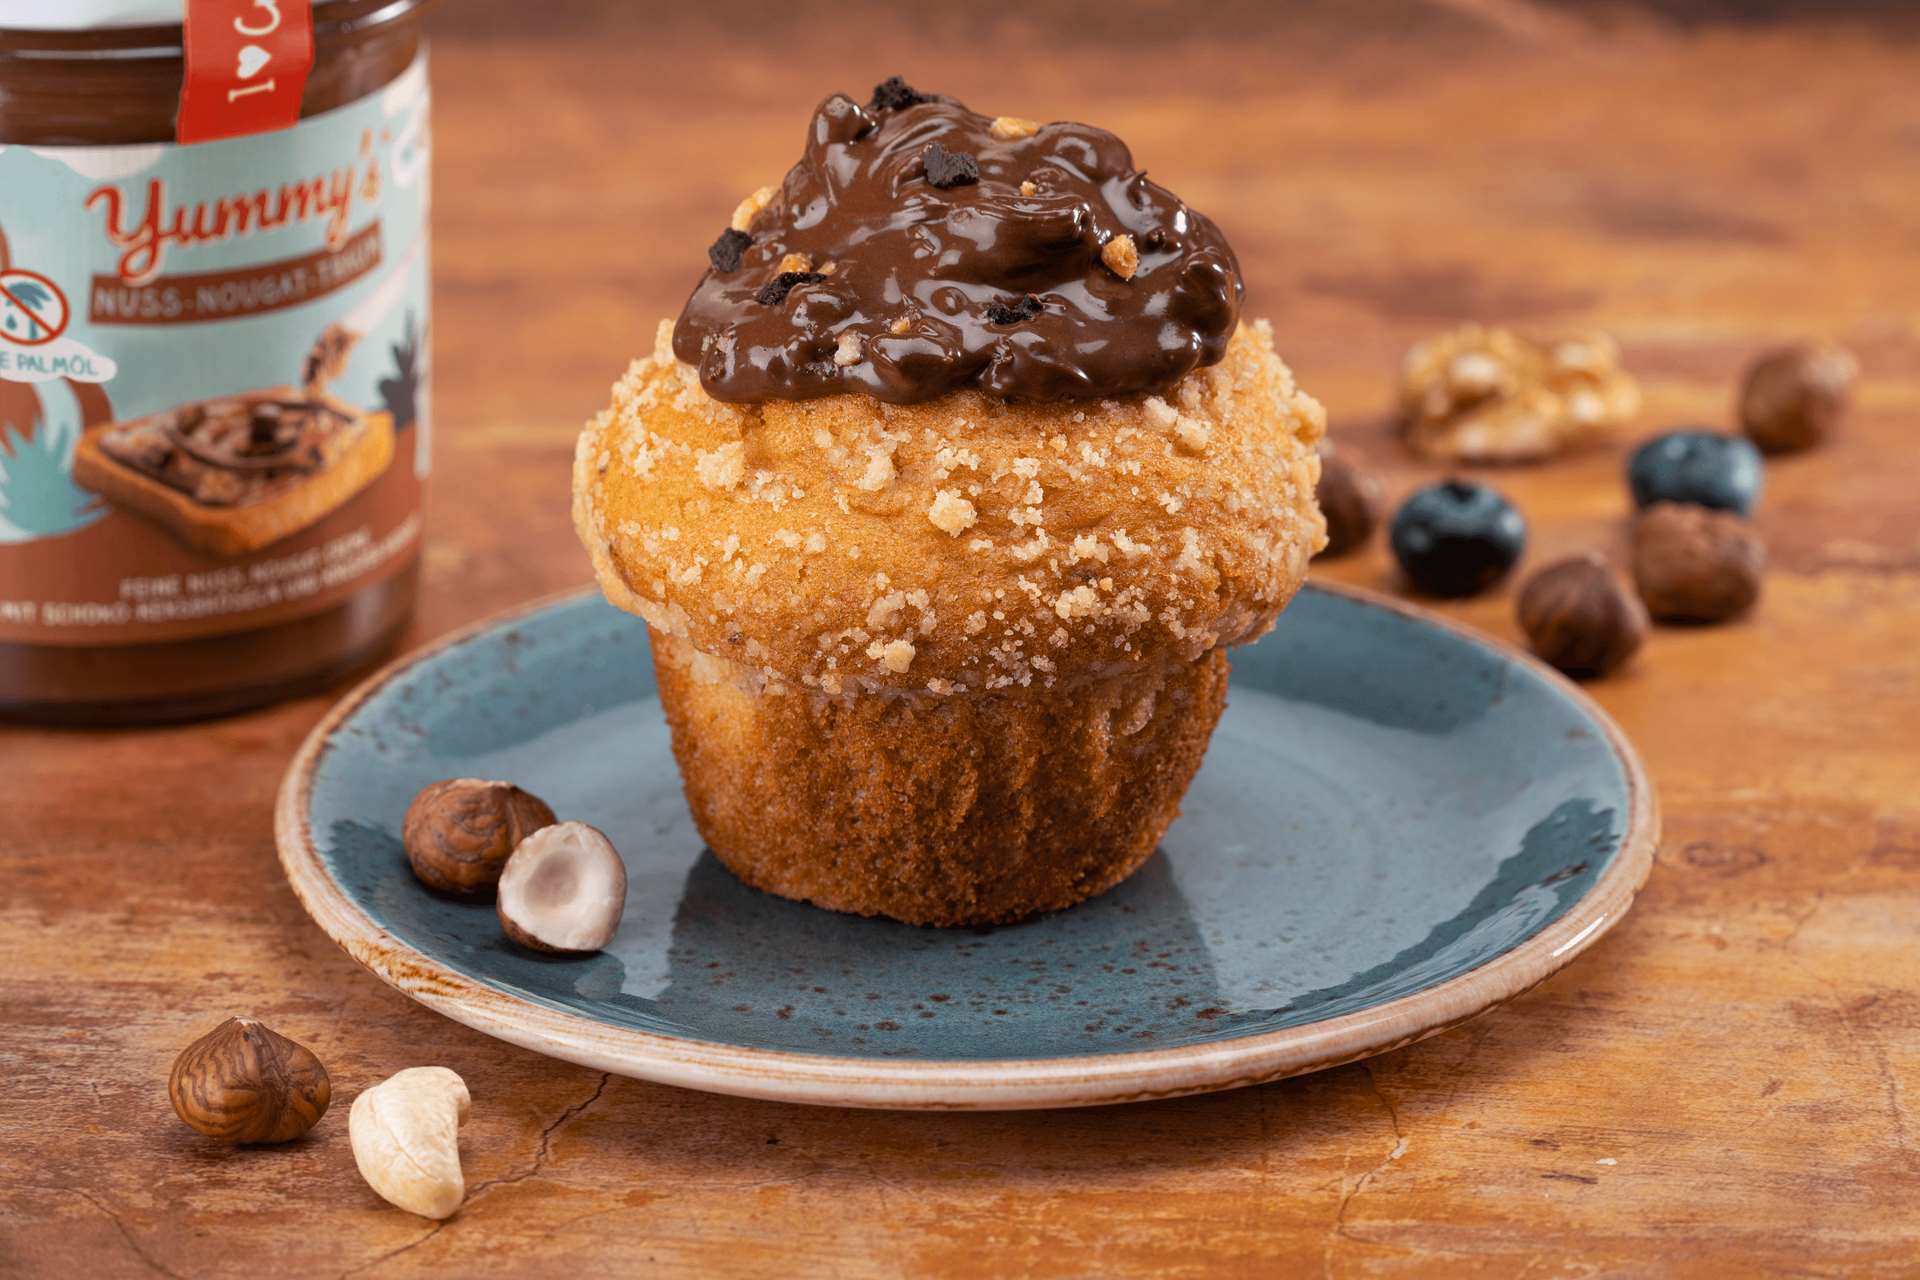 MUFFIN MIT YUMMY’S NUSS-NOUGAT-TOPPING